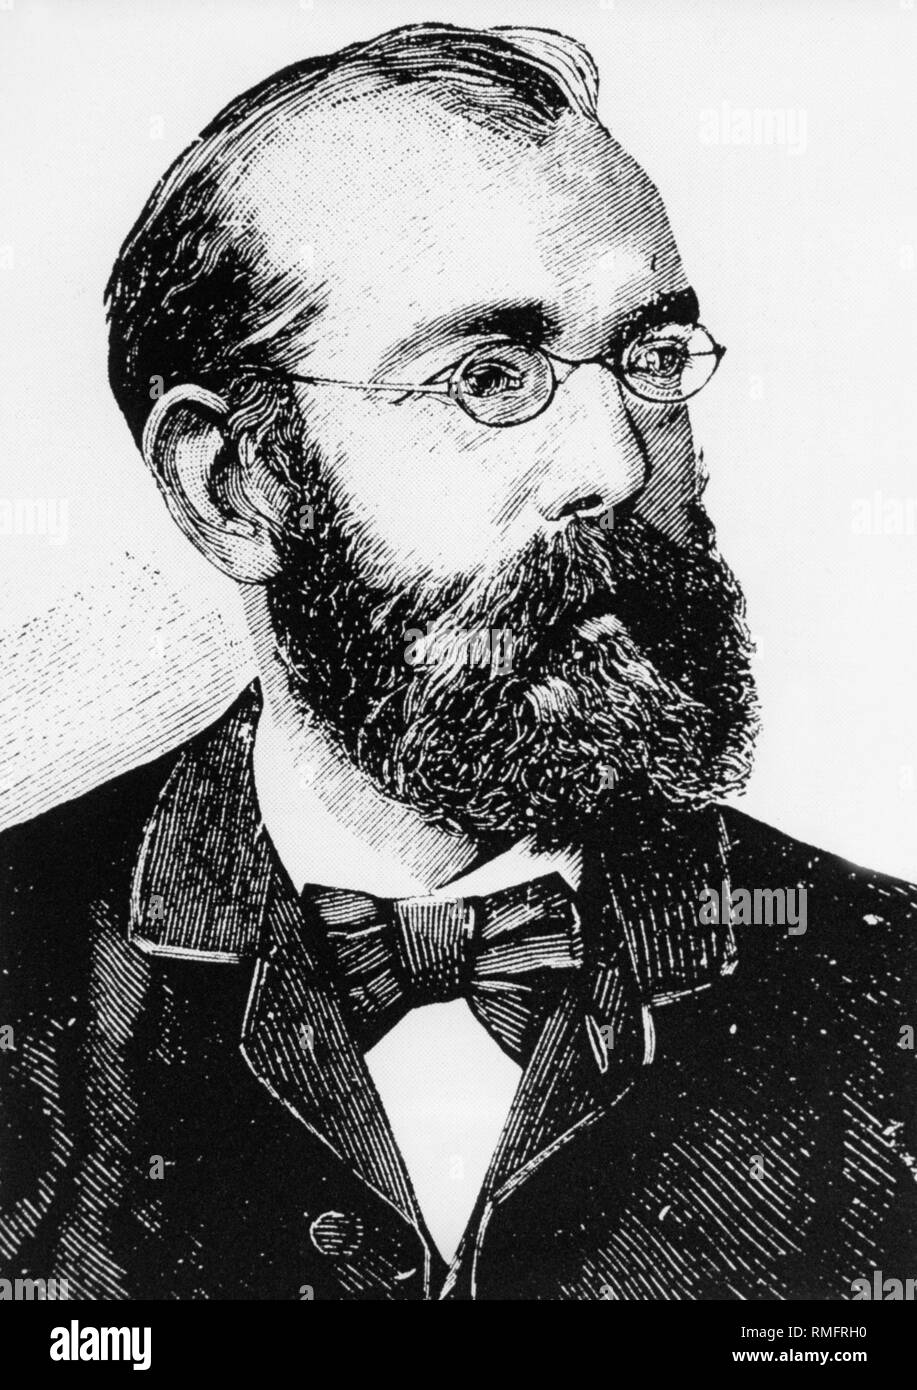 Robert Koch (1843-1910), German bacteriologist, received the Nobel Prize in Physiology or Medicine in 1905. He discovered the causative agents of tuberculosis. Stock Photo